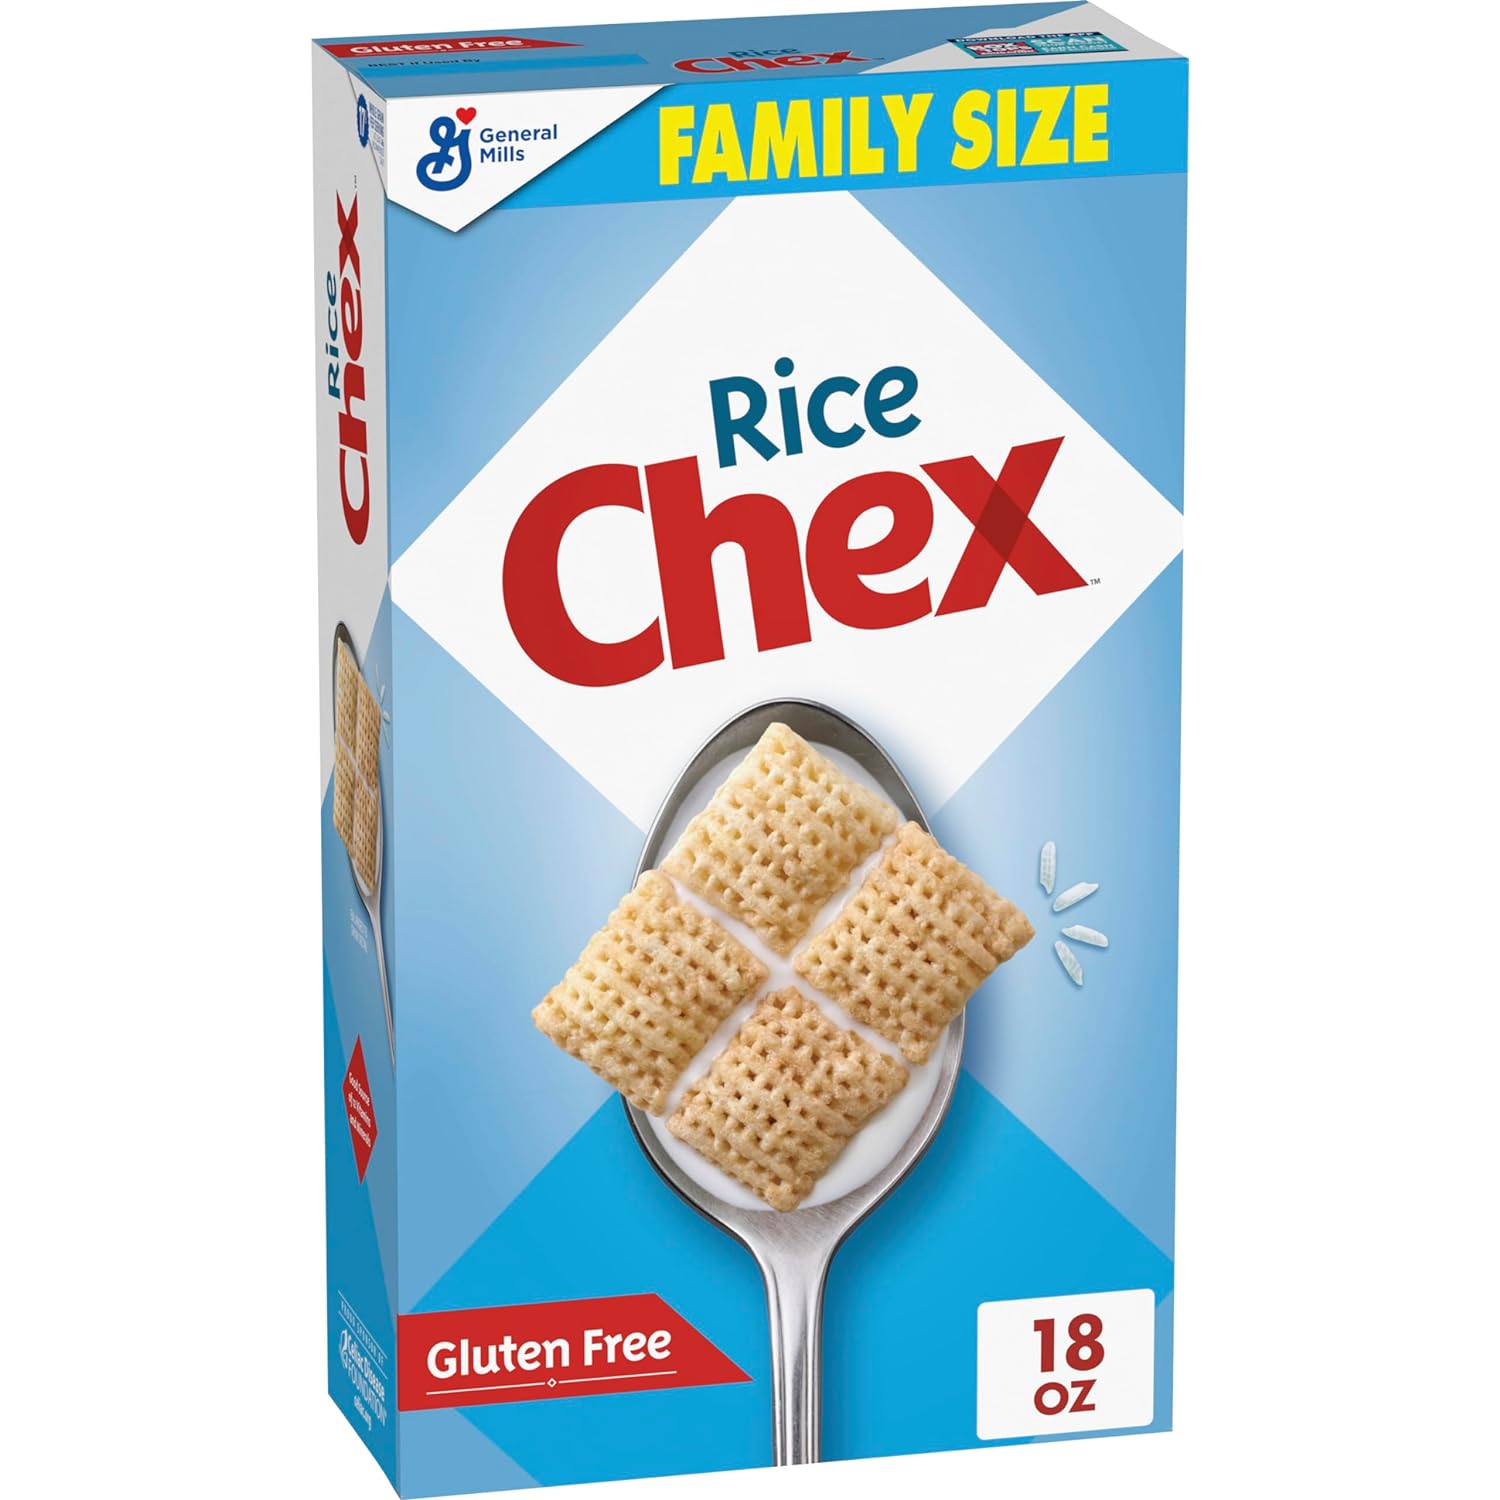 Rice Chex Gluten Free Breakfast Cereal, Made with Whole Grain, Family Size, 18 oz